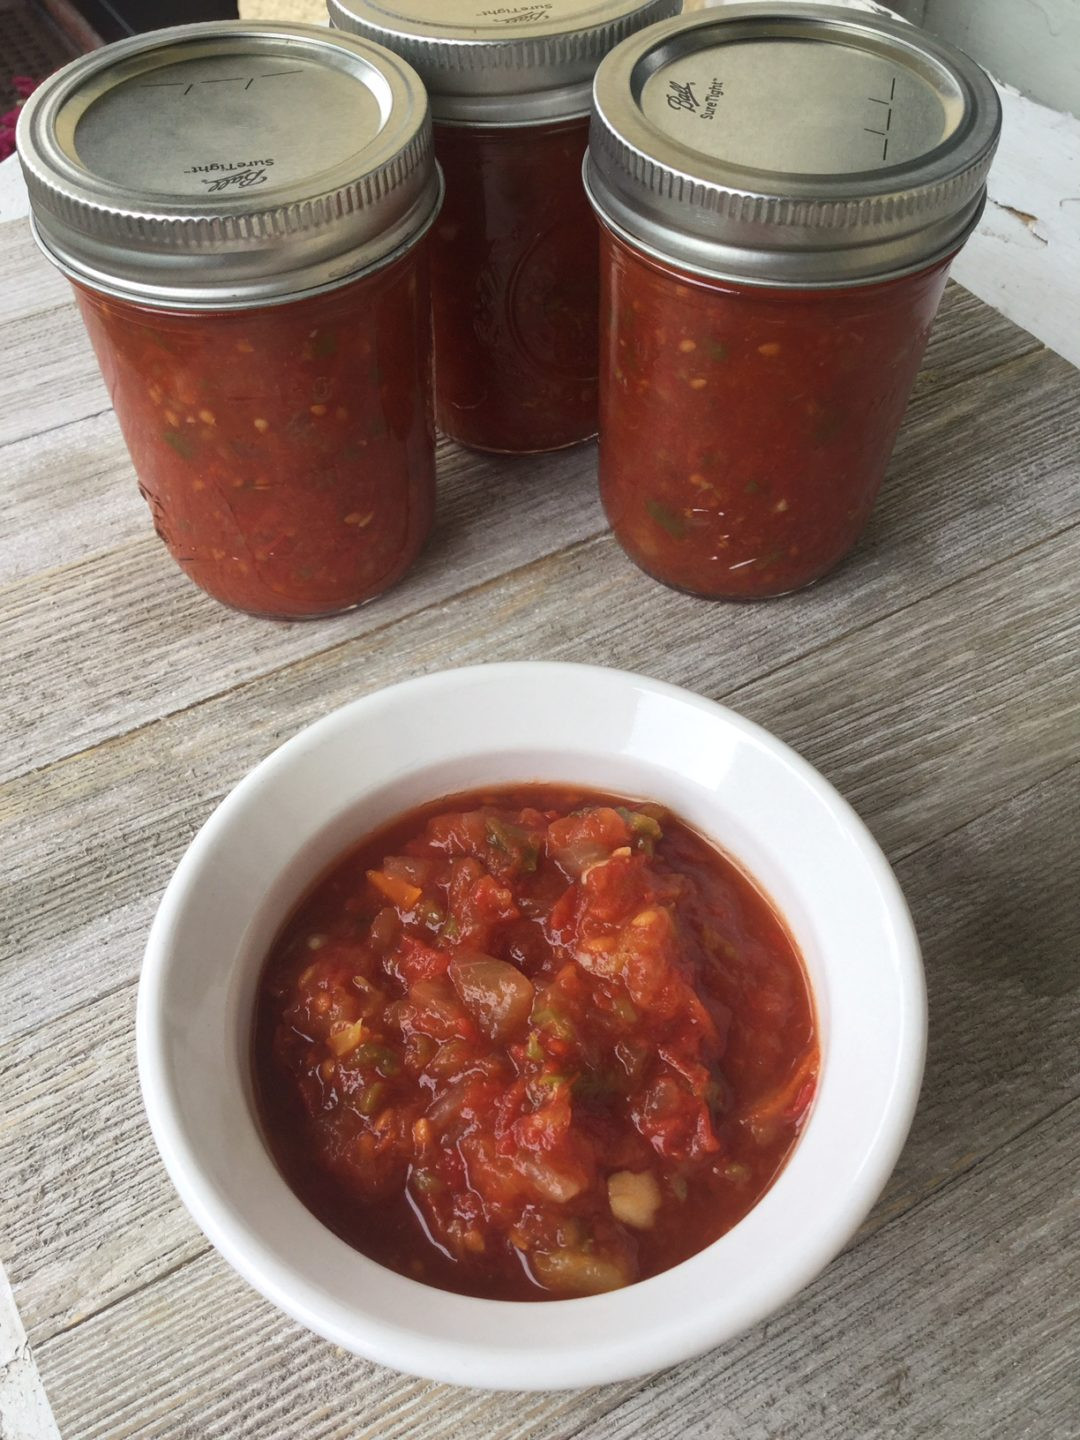 Canning Salsa Recipe
 The Best Homemade Salsa for Canning My Healthy